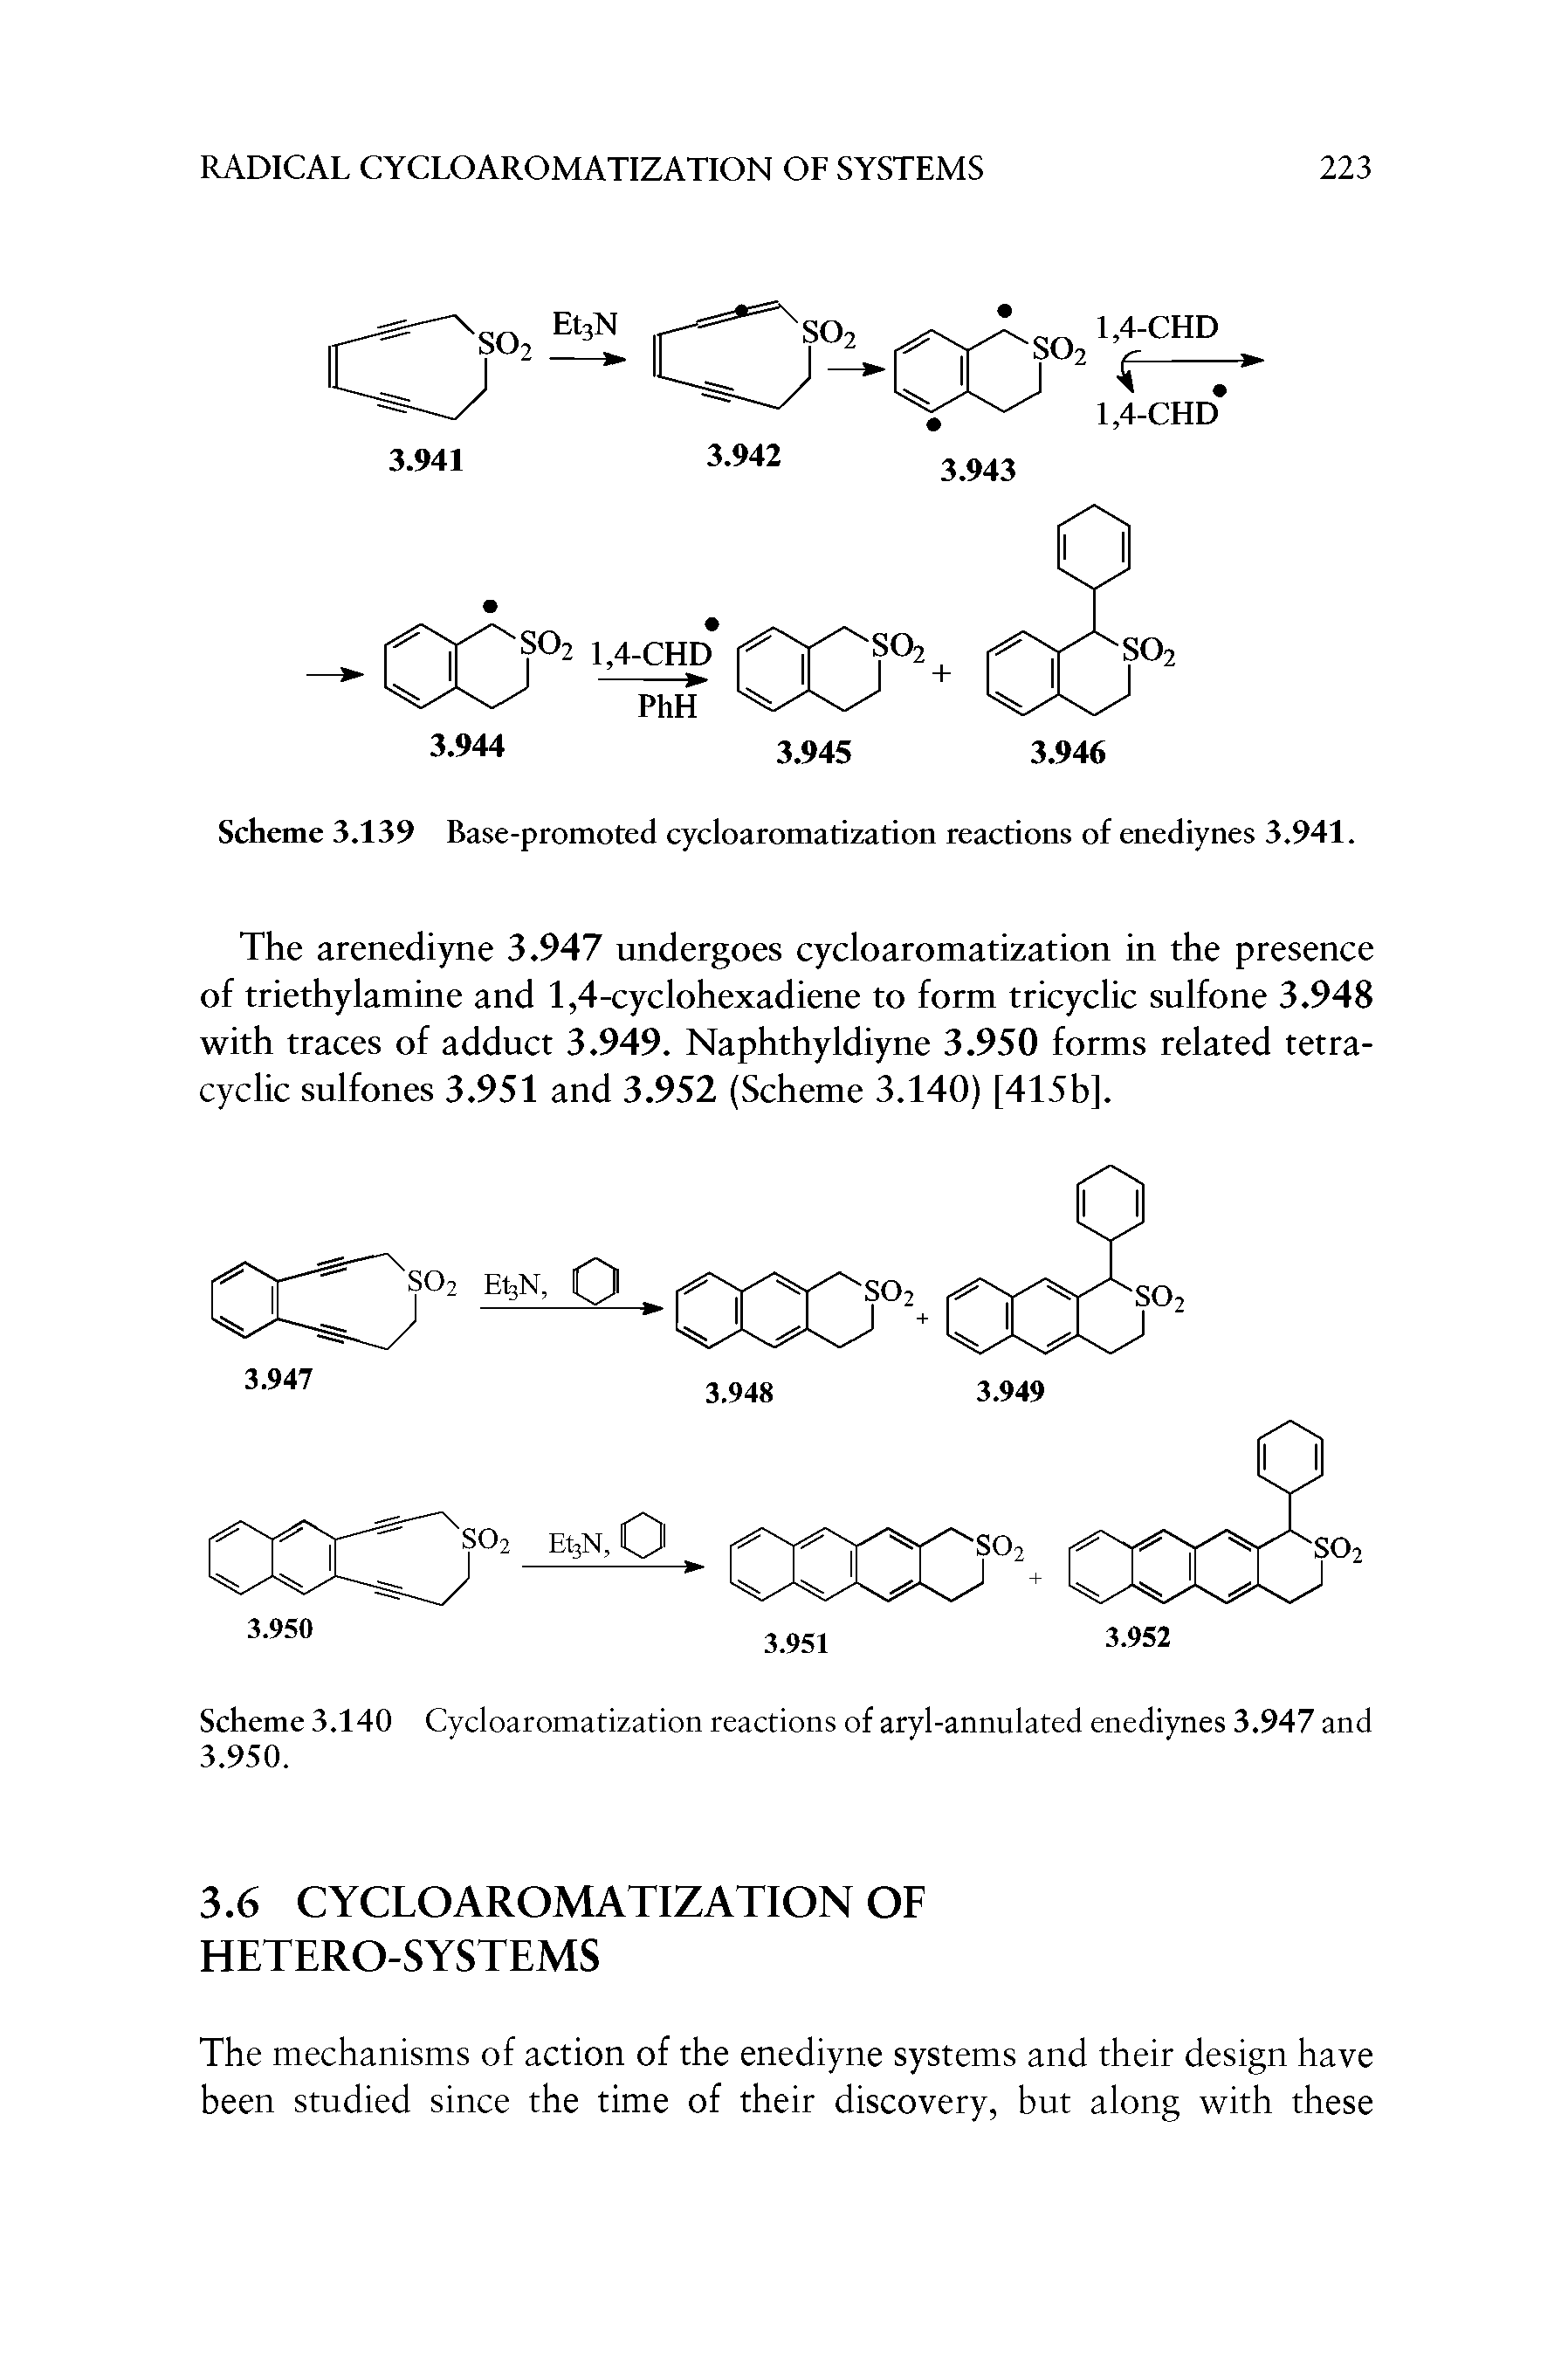 Scheme 3.140 Cycloaromatization reactions of aryl-annulated enediynes 3.947 and 3.950.